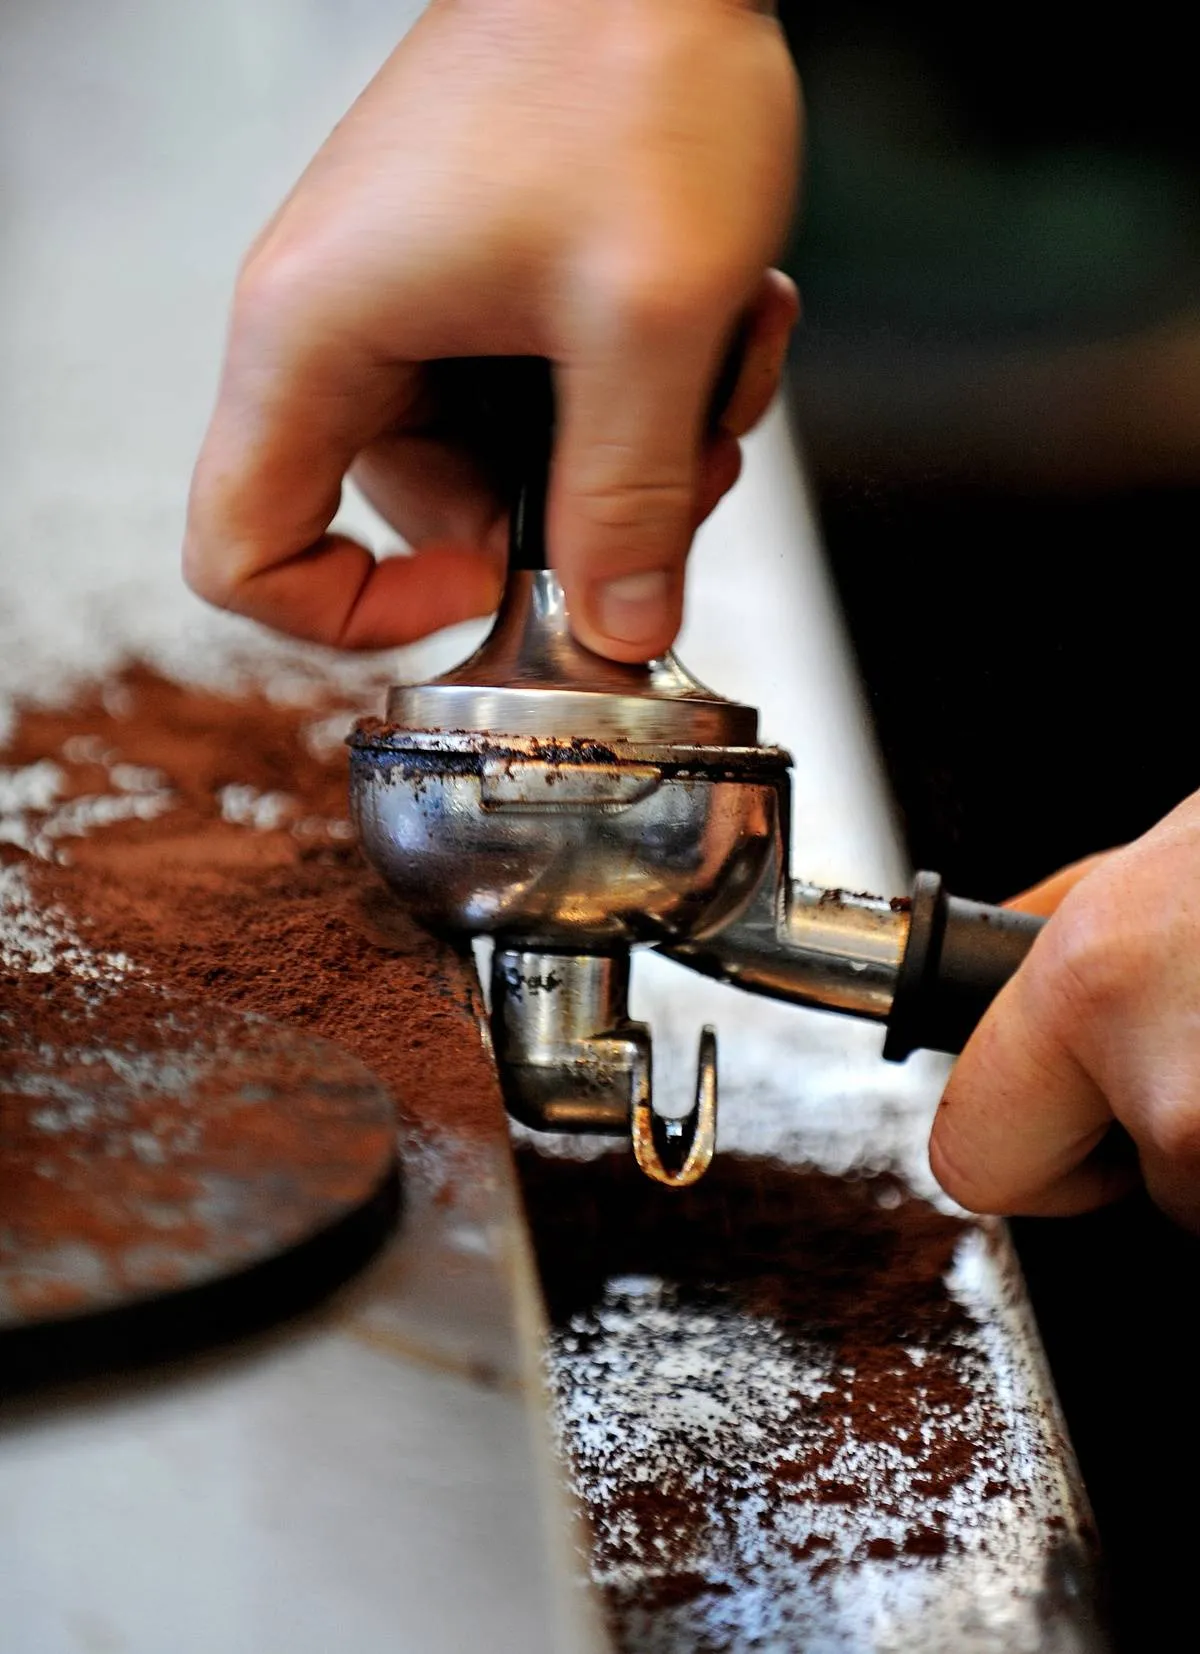 A tamper (C) is used to prepare coffee g